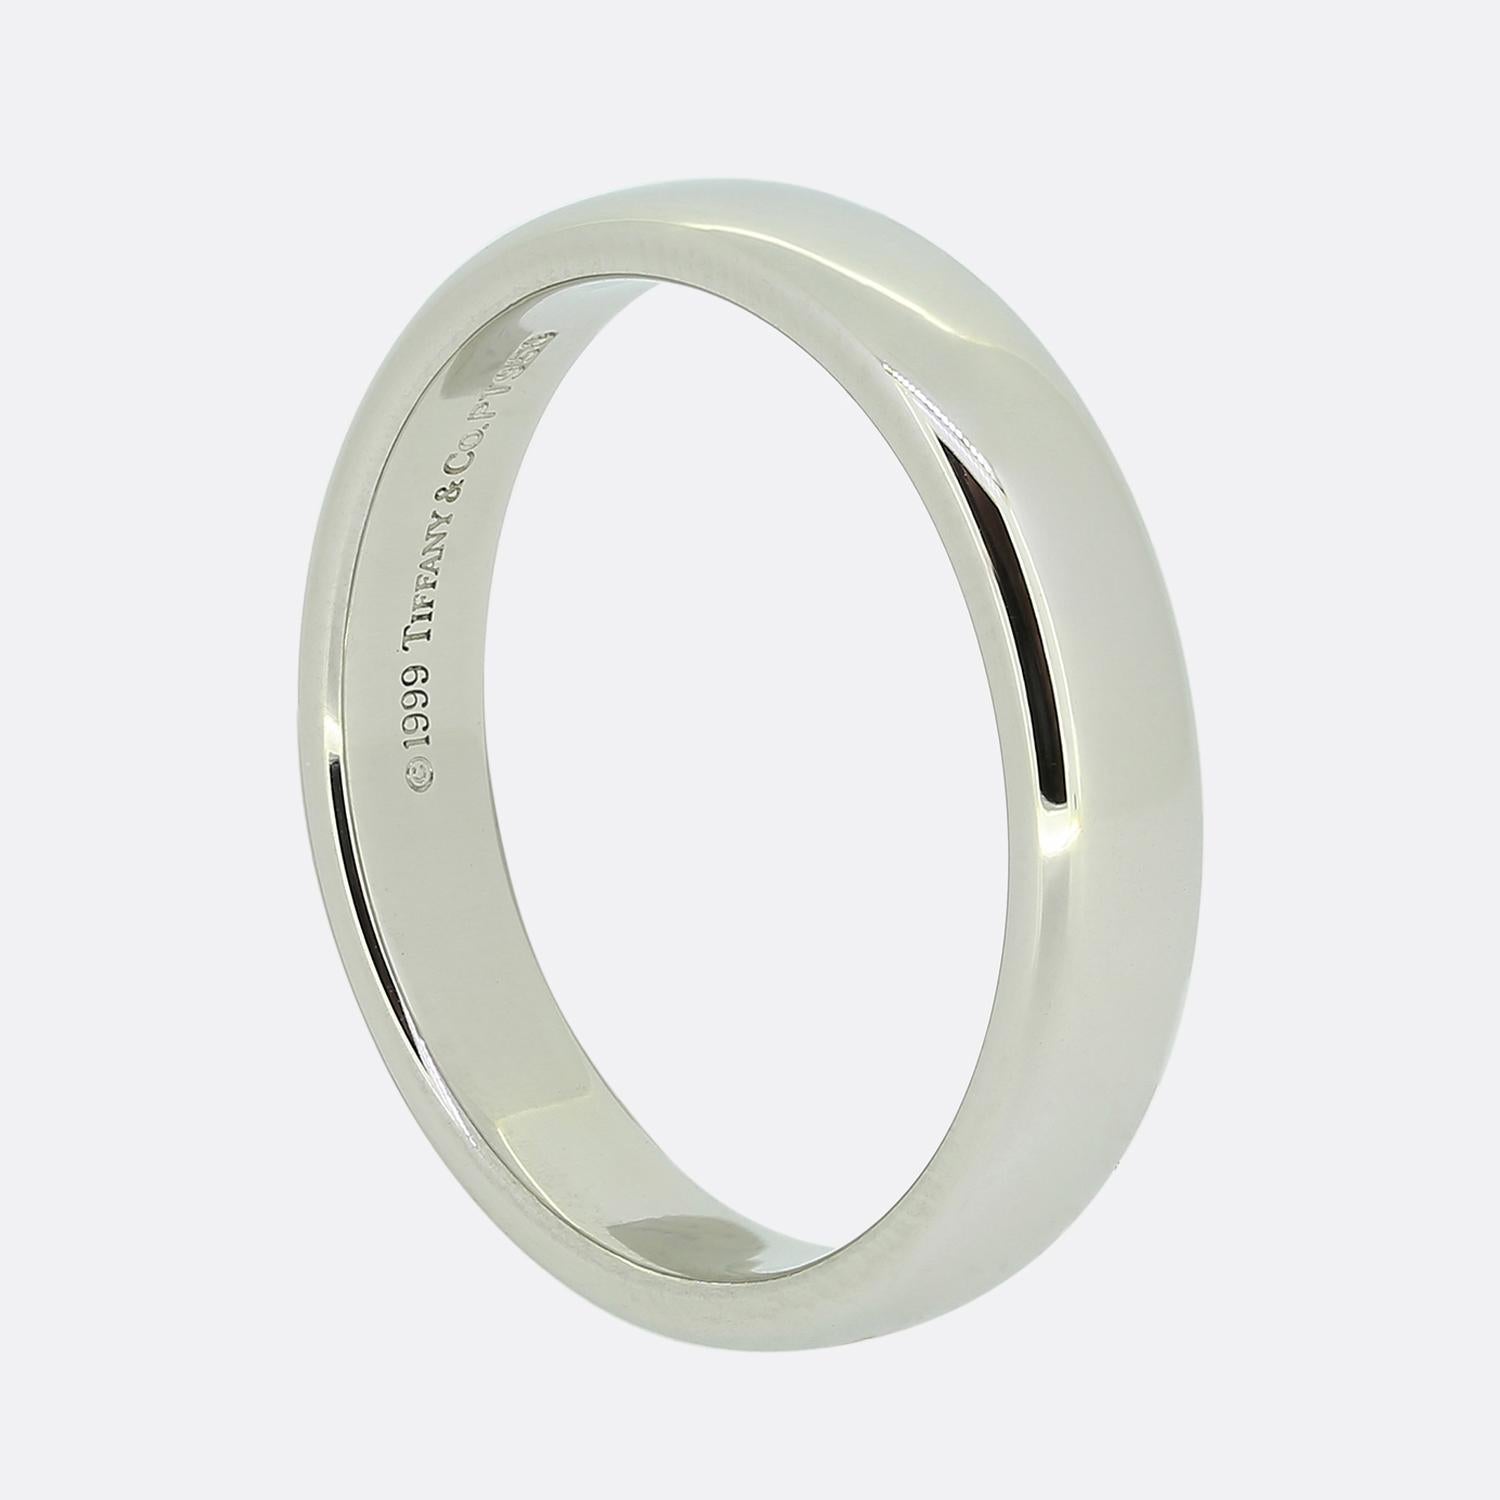 Here we have a classic plain polished wedding band ring from the world renowned jewellery designer, Tiffany & Co. This timeless piece has been crafted from platinum, is 4mm in width and is perfect for both men and women.

Condition: Used